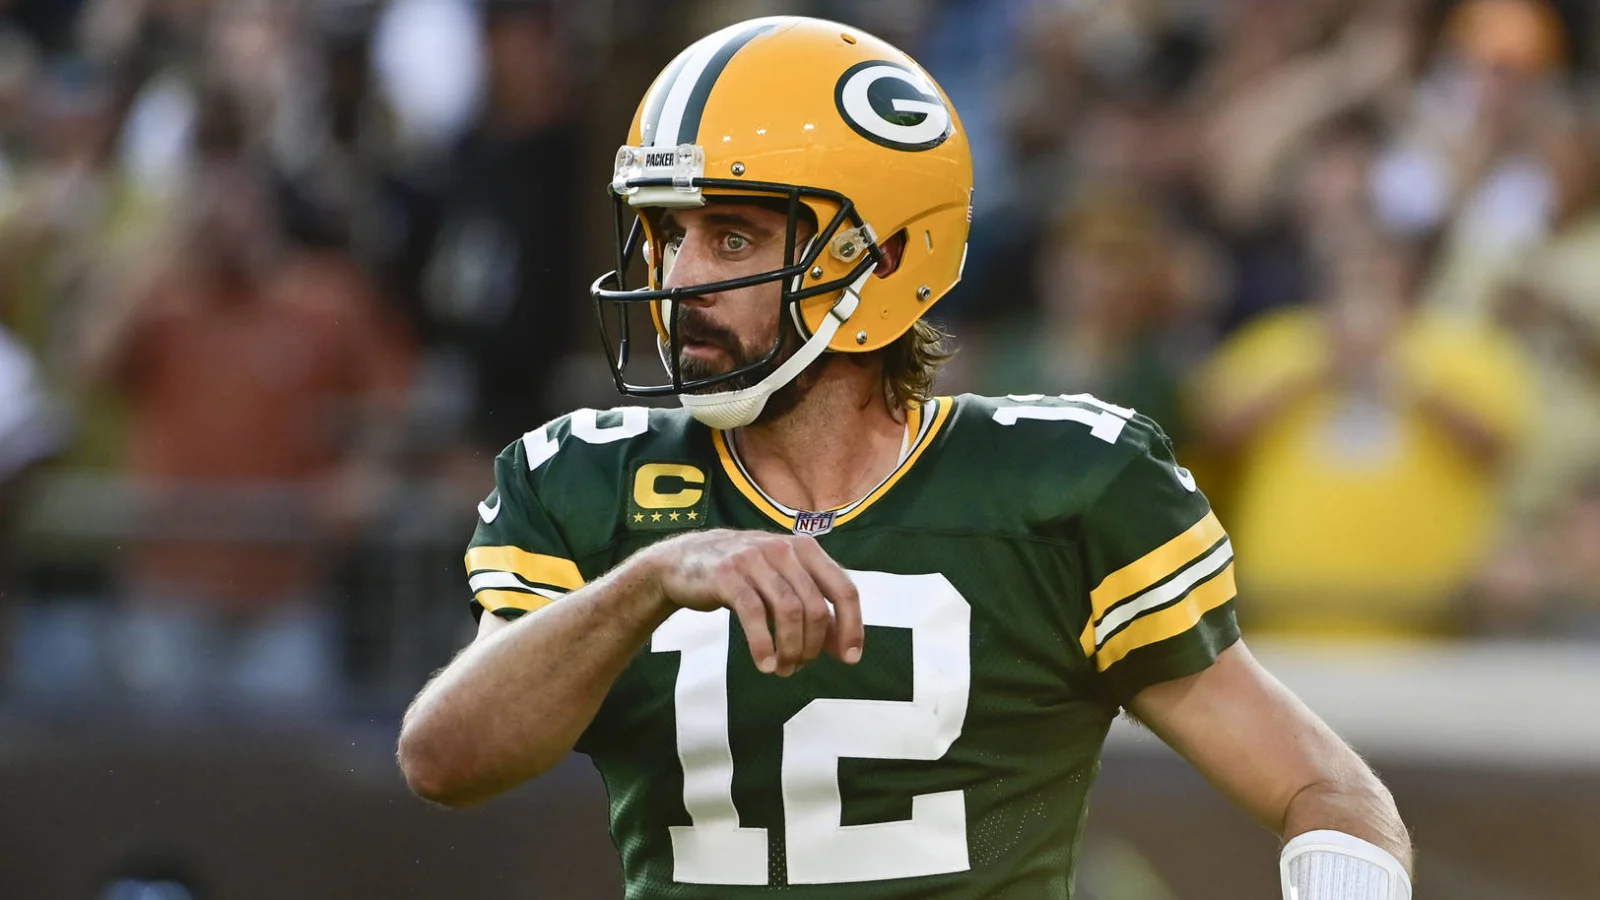 Aaron Rodgers Defends Off-Field Passions, Stresses Team Cohesion Amid Jets’ Upcoming SeasonAaron Rodgers Defends Off-Field Passions, Stresses Team Cohesion Amid Jets’ Upcoming Season